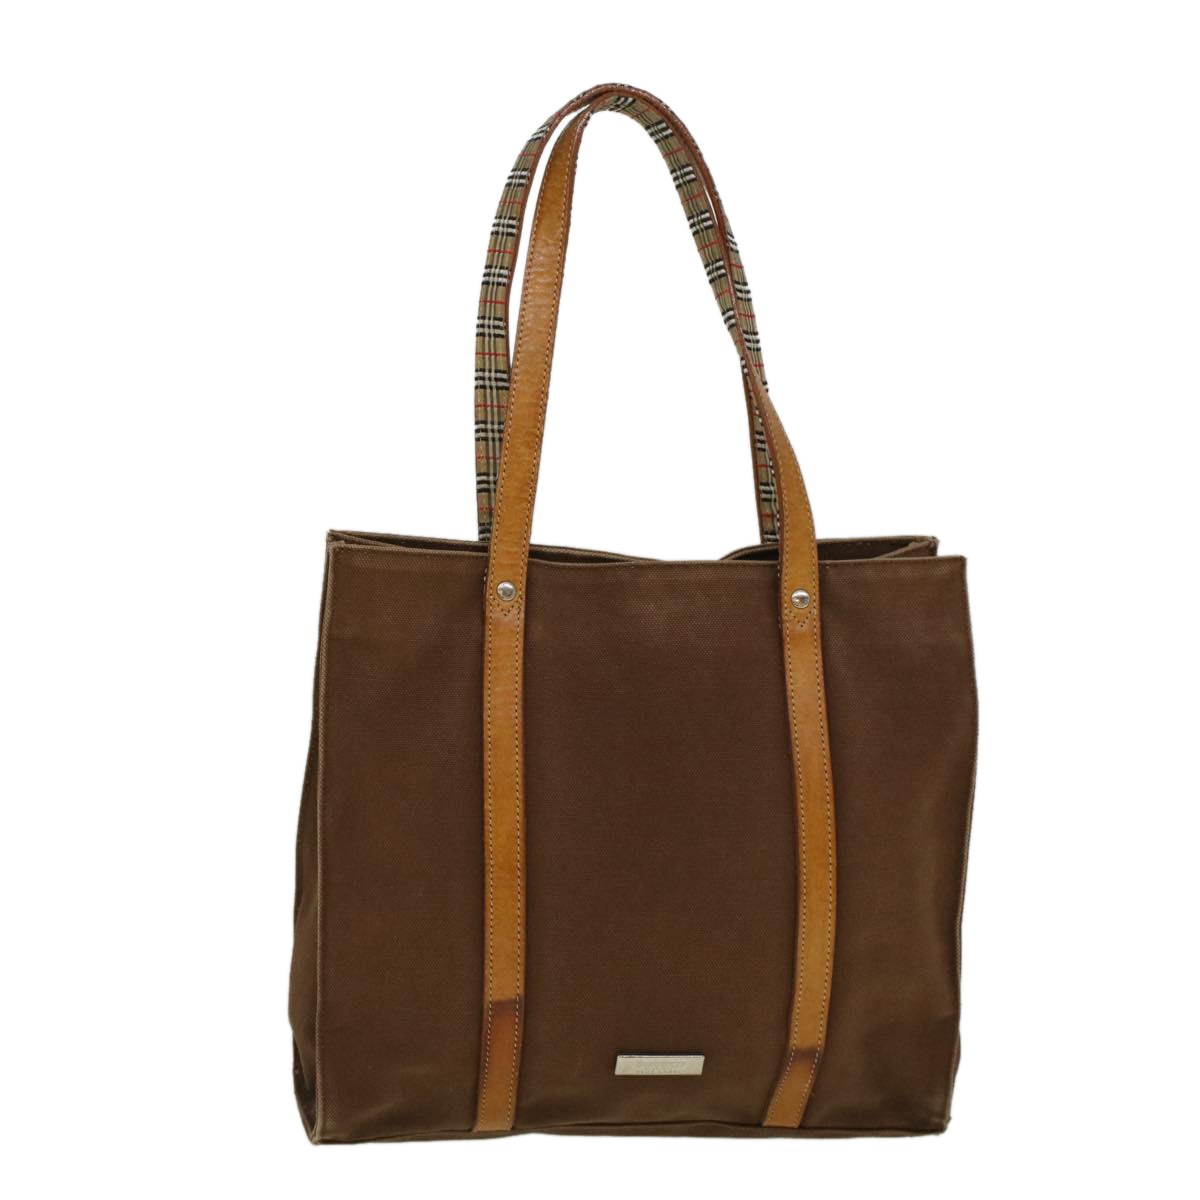 Burberrys Blue Label Tote Bag Canvas Leather Brown Auth ti1321